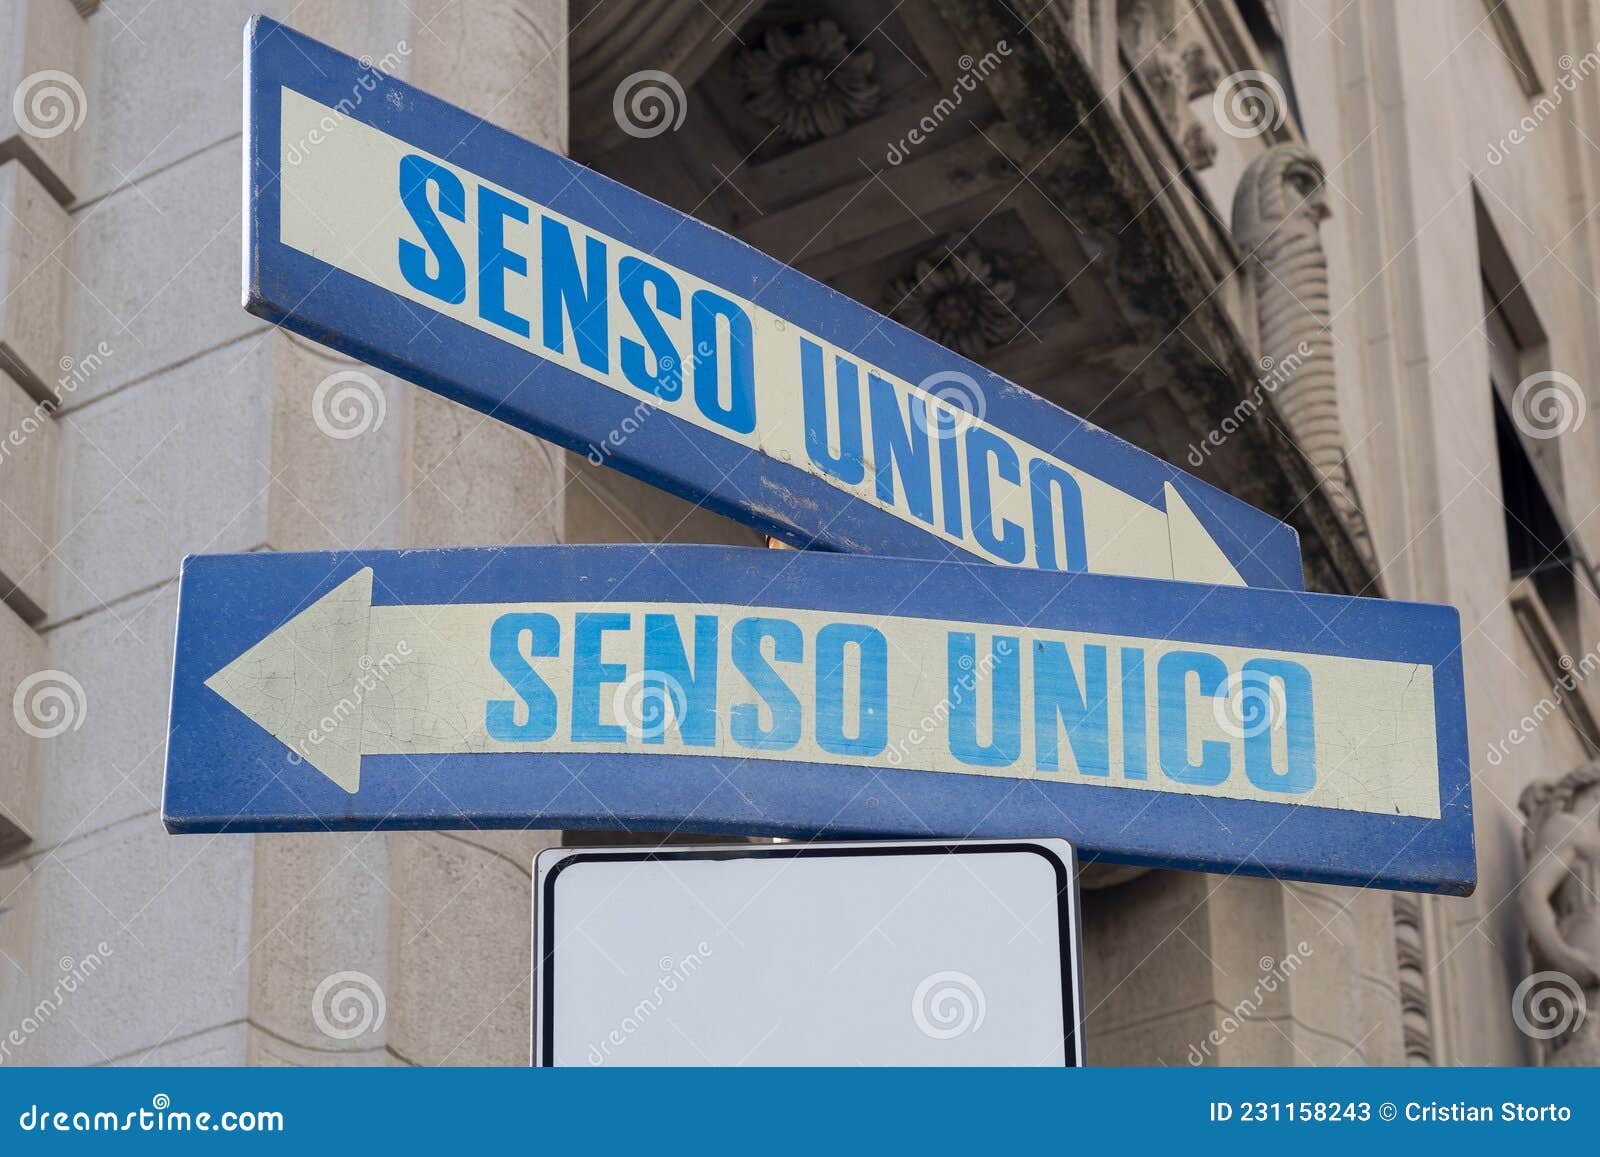 road sign indicating one way senso unico in both directions